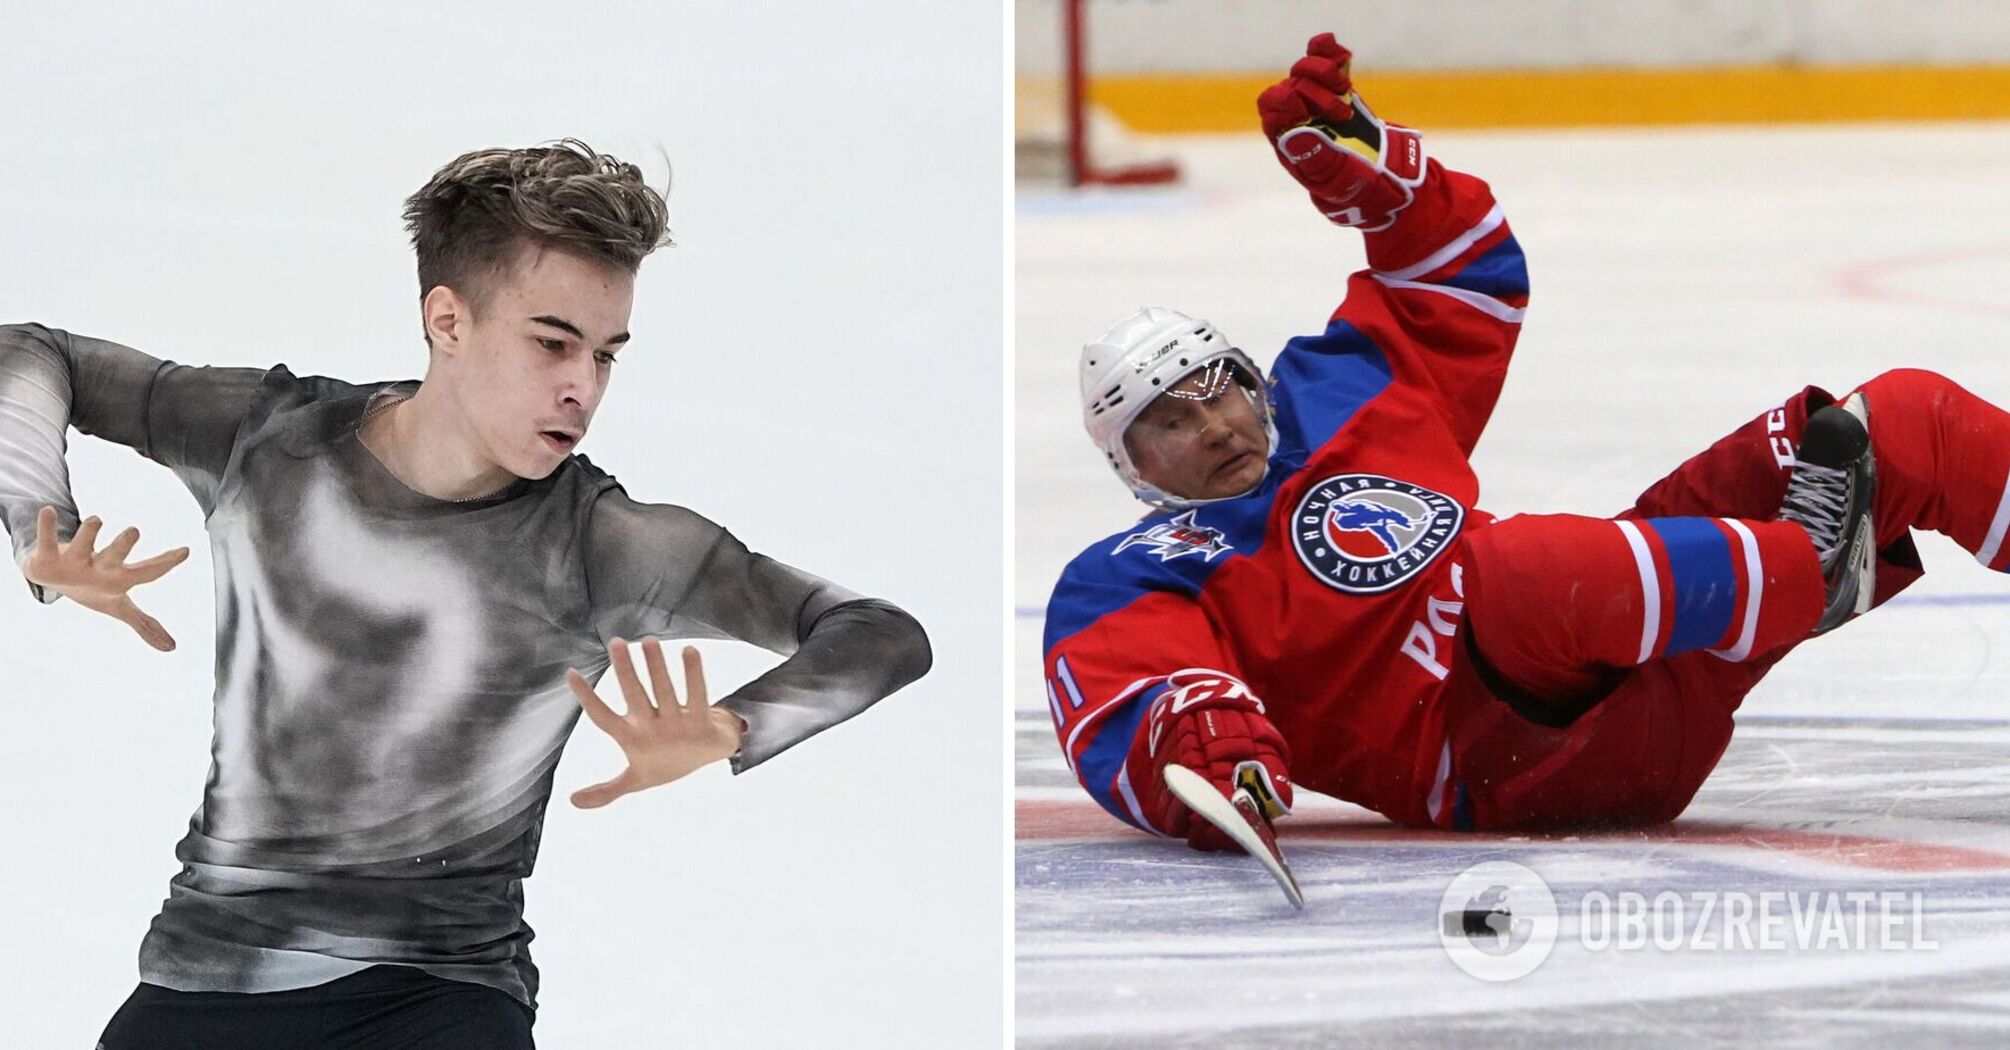 'Going against the president? That's nonsense.' Russian figure skater Samsonov, 18, bends to Putin in epic fashion